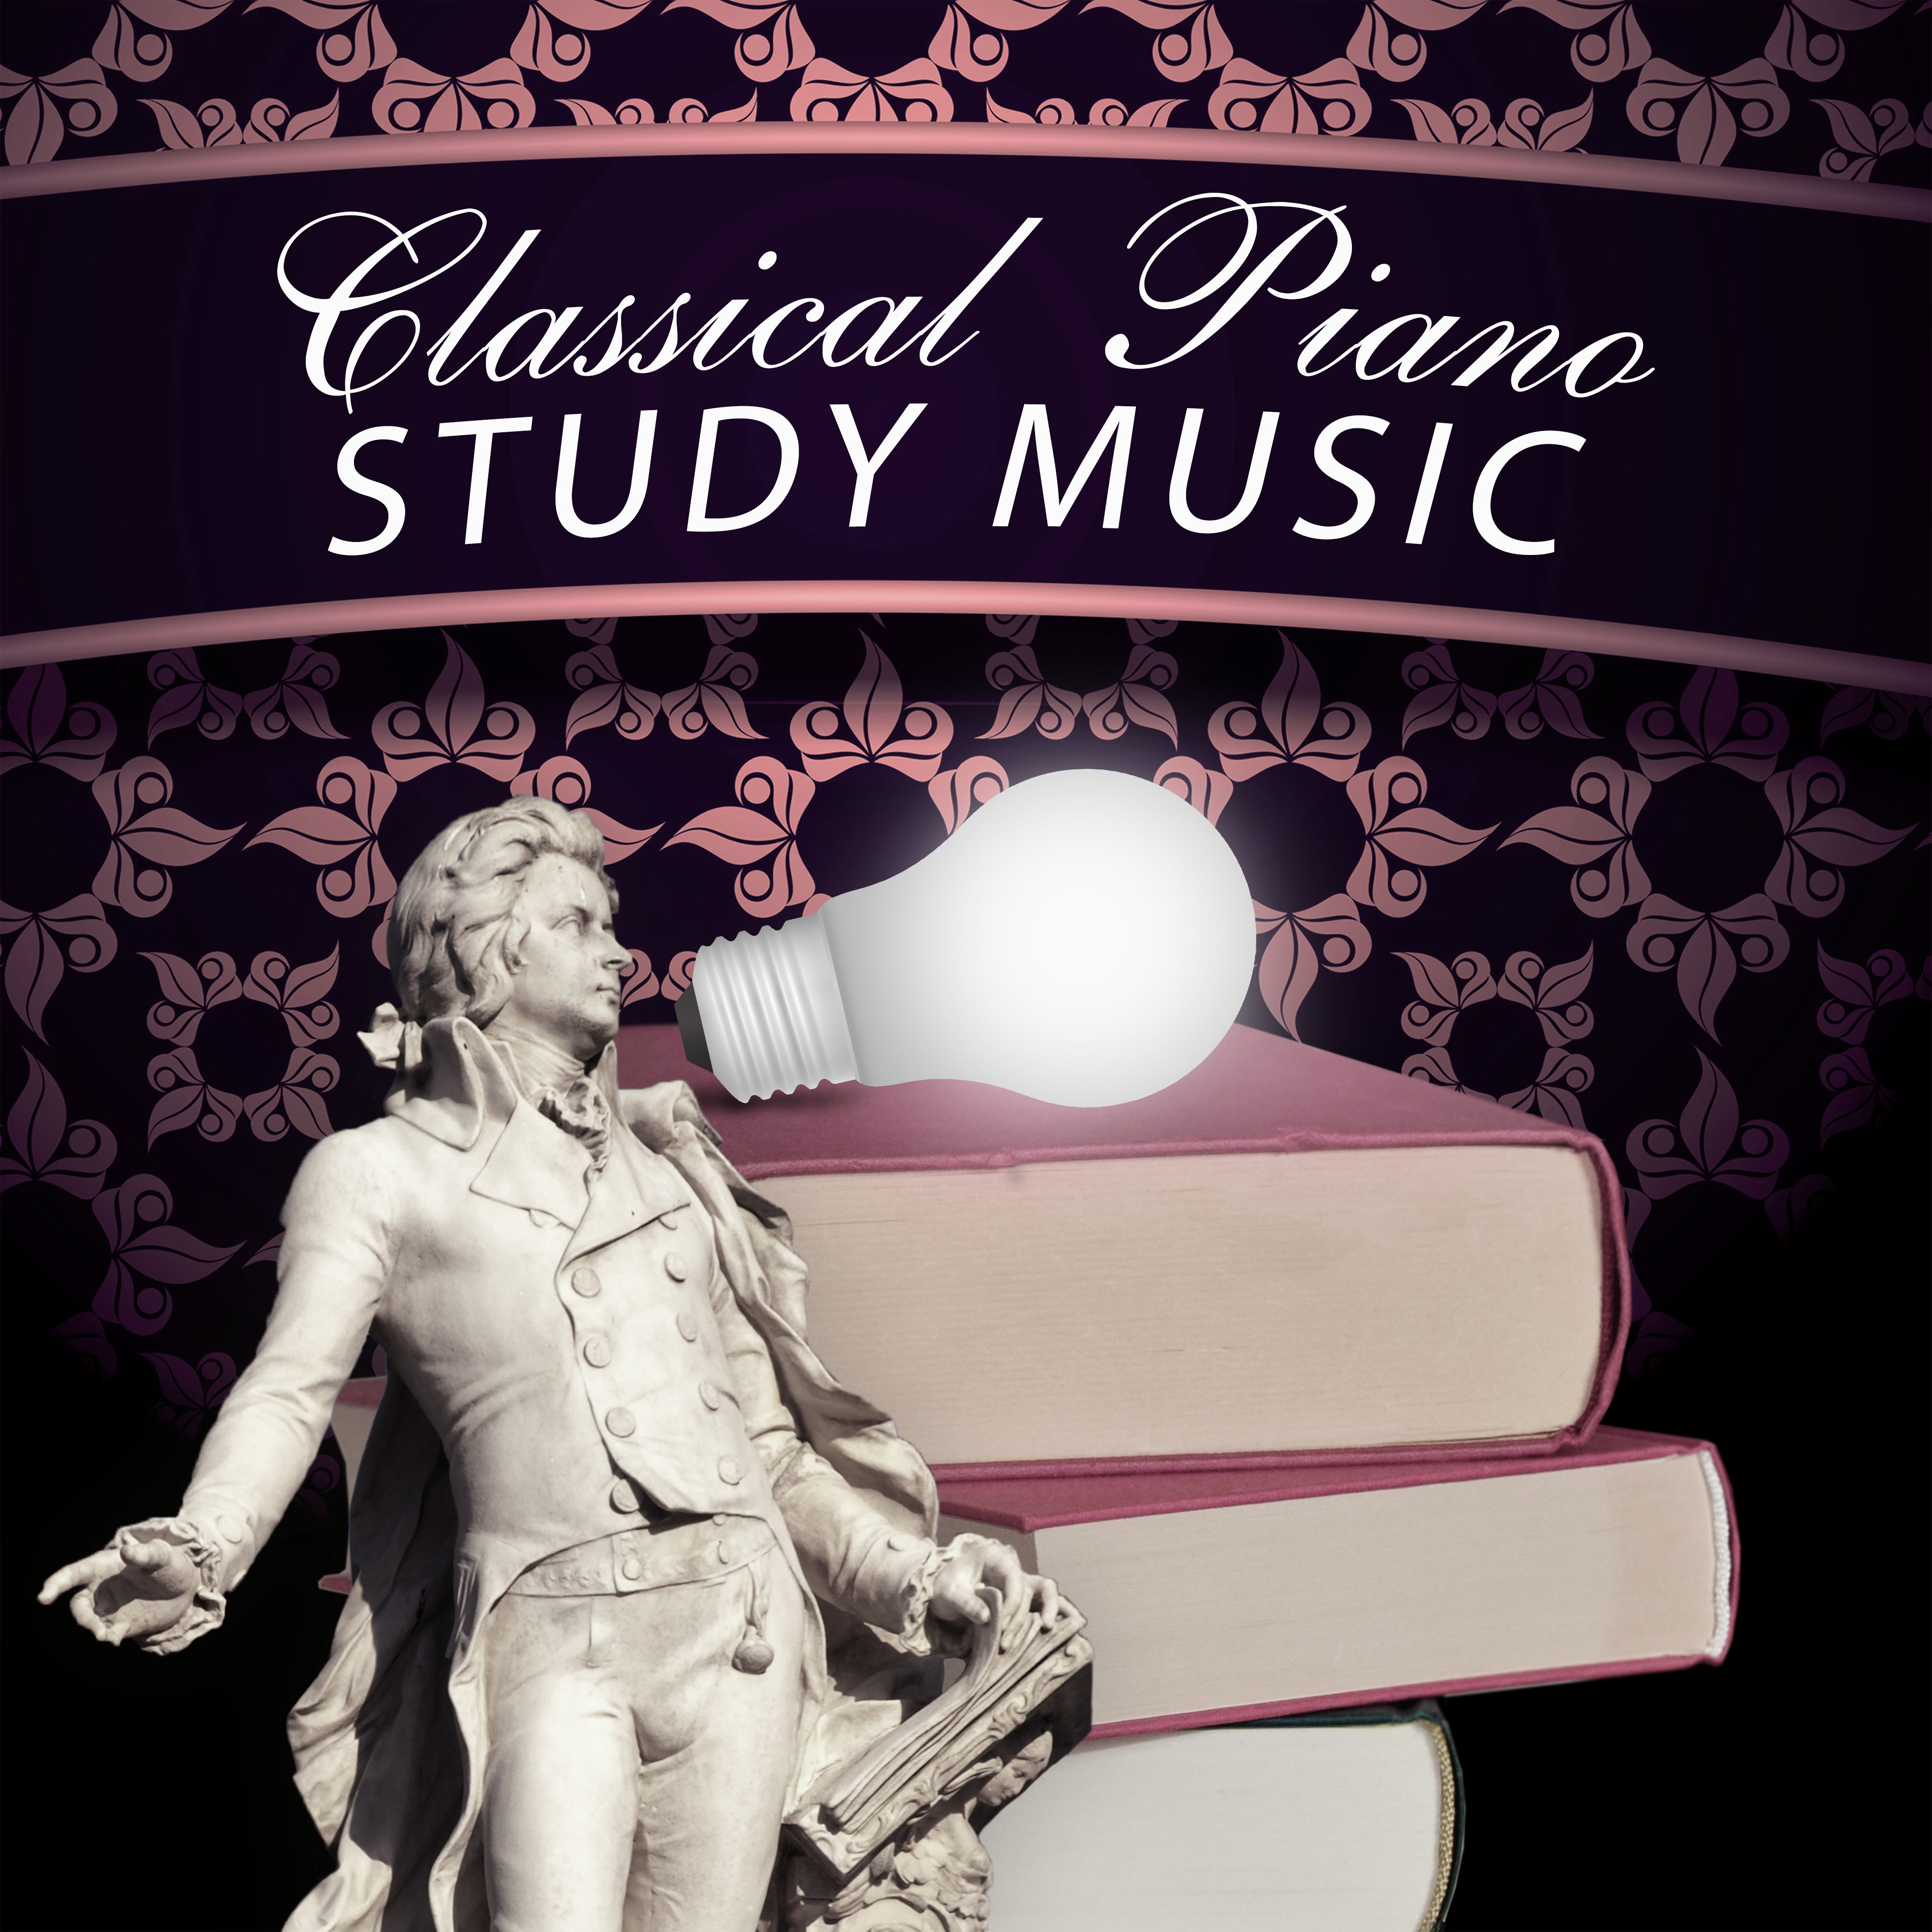 Classical Piano Study Music – Relaxing Study and Reading Classics, Bach to Work, Effective Study, Mozart, Beethoven